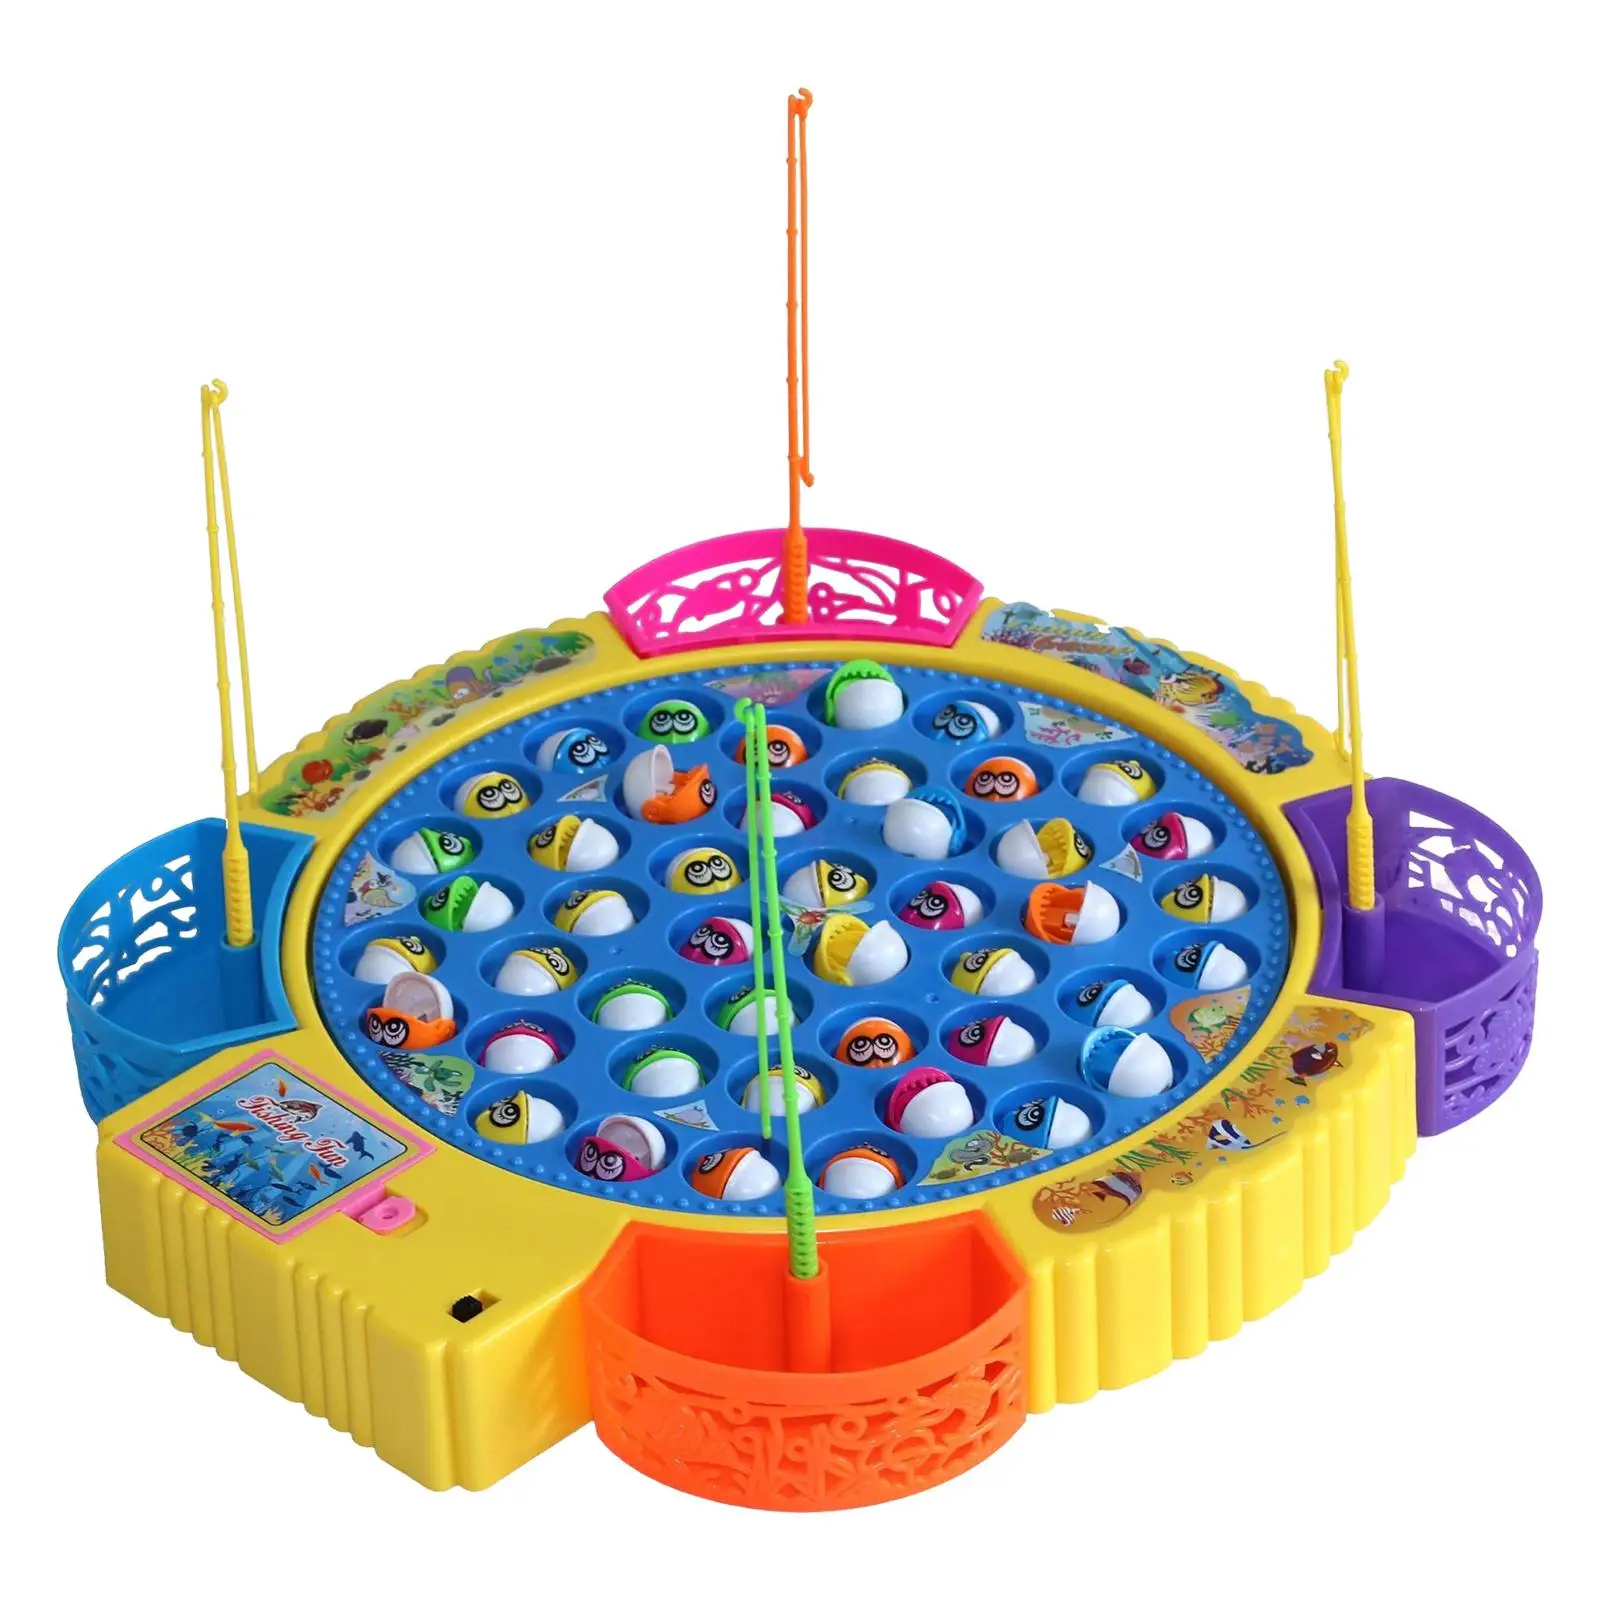 Rotating Fishing Game Kids Toy for Kids Children Early Learning Toy Ages 3+